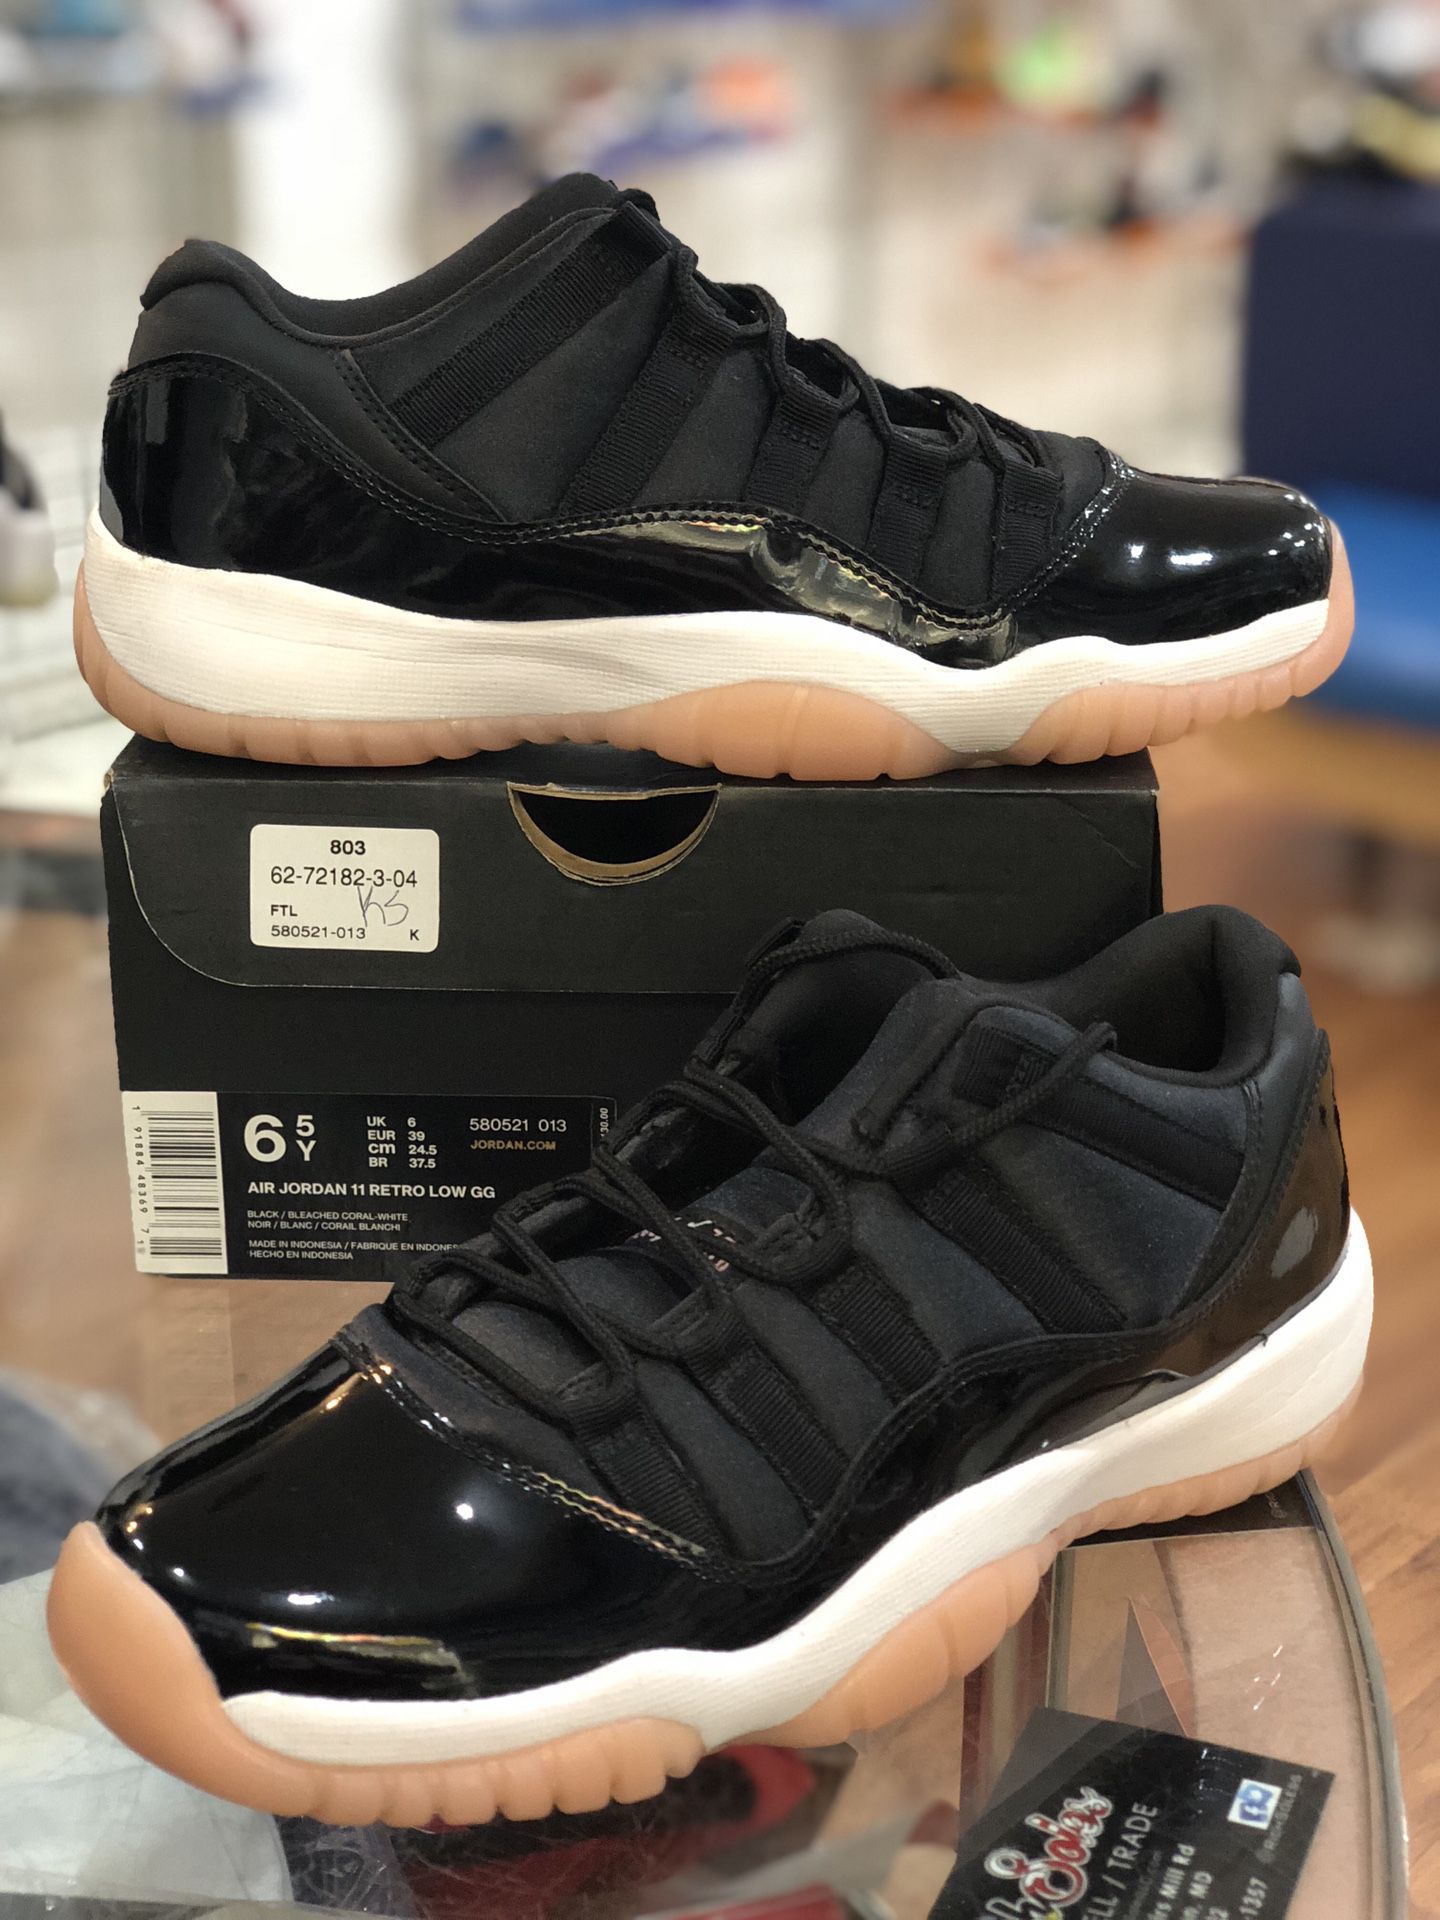 Coral bleached low 11s size 6.5